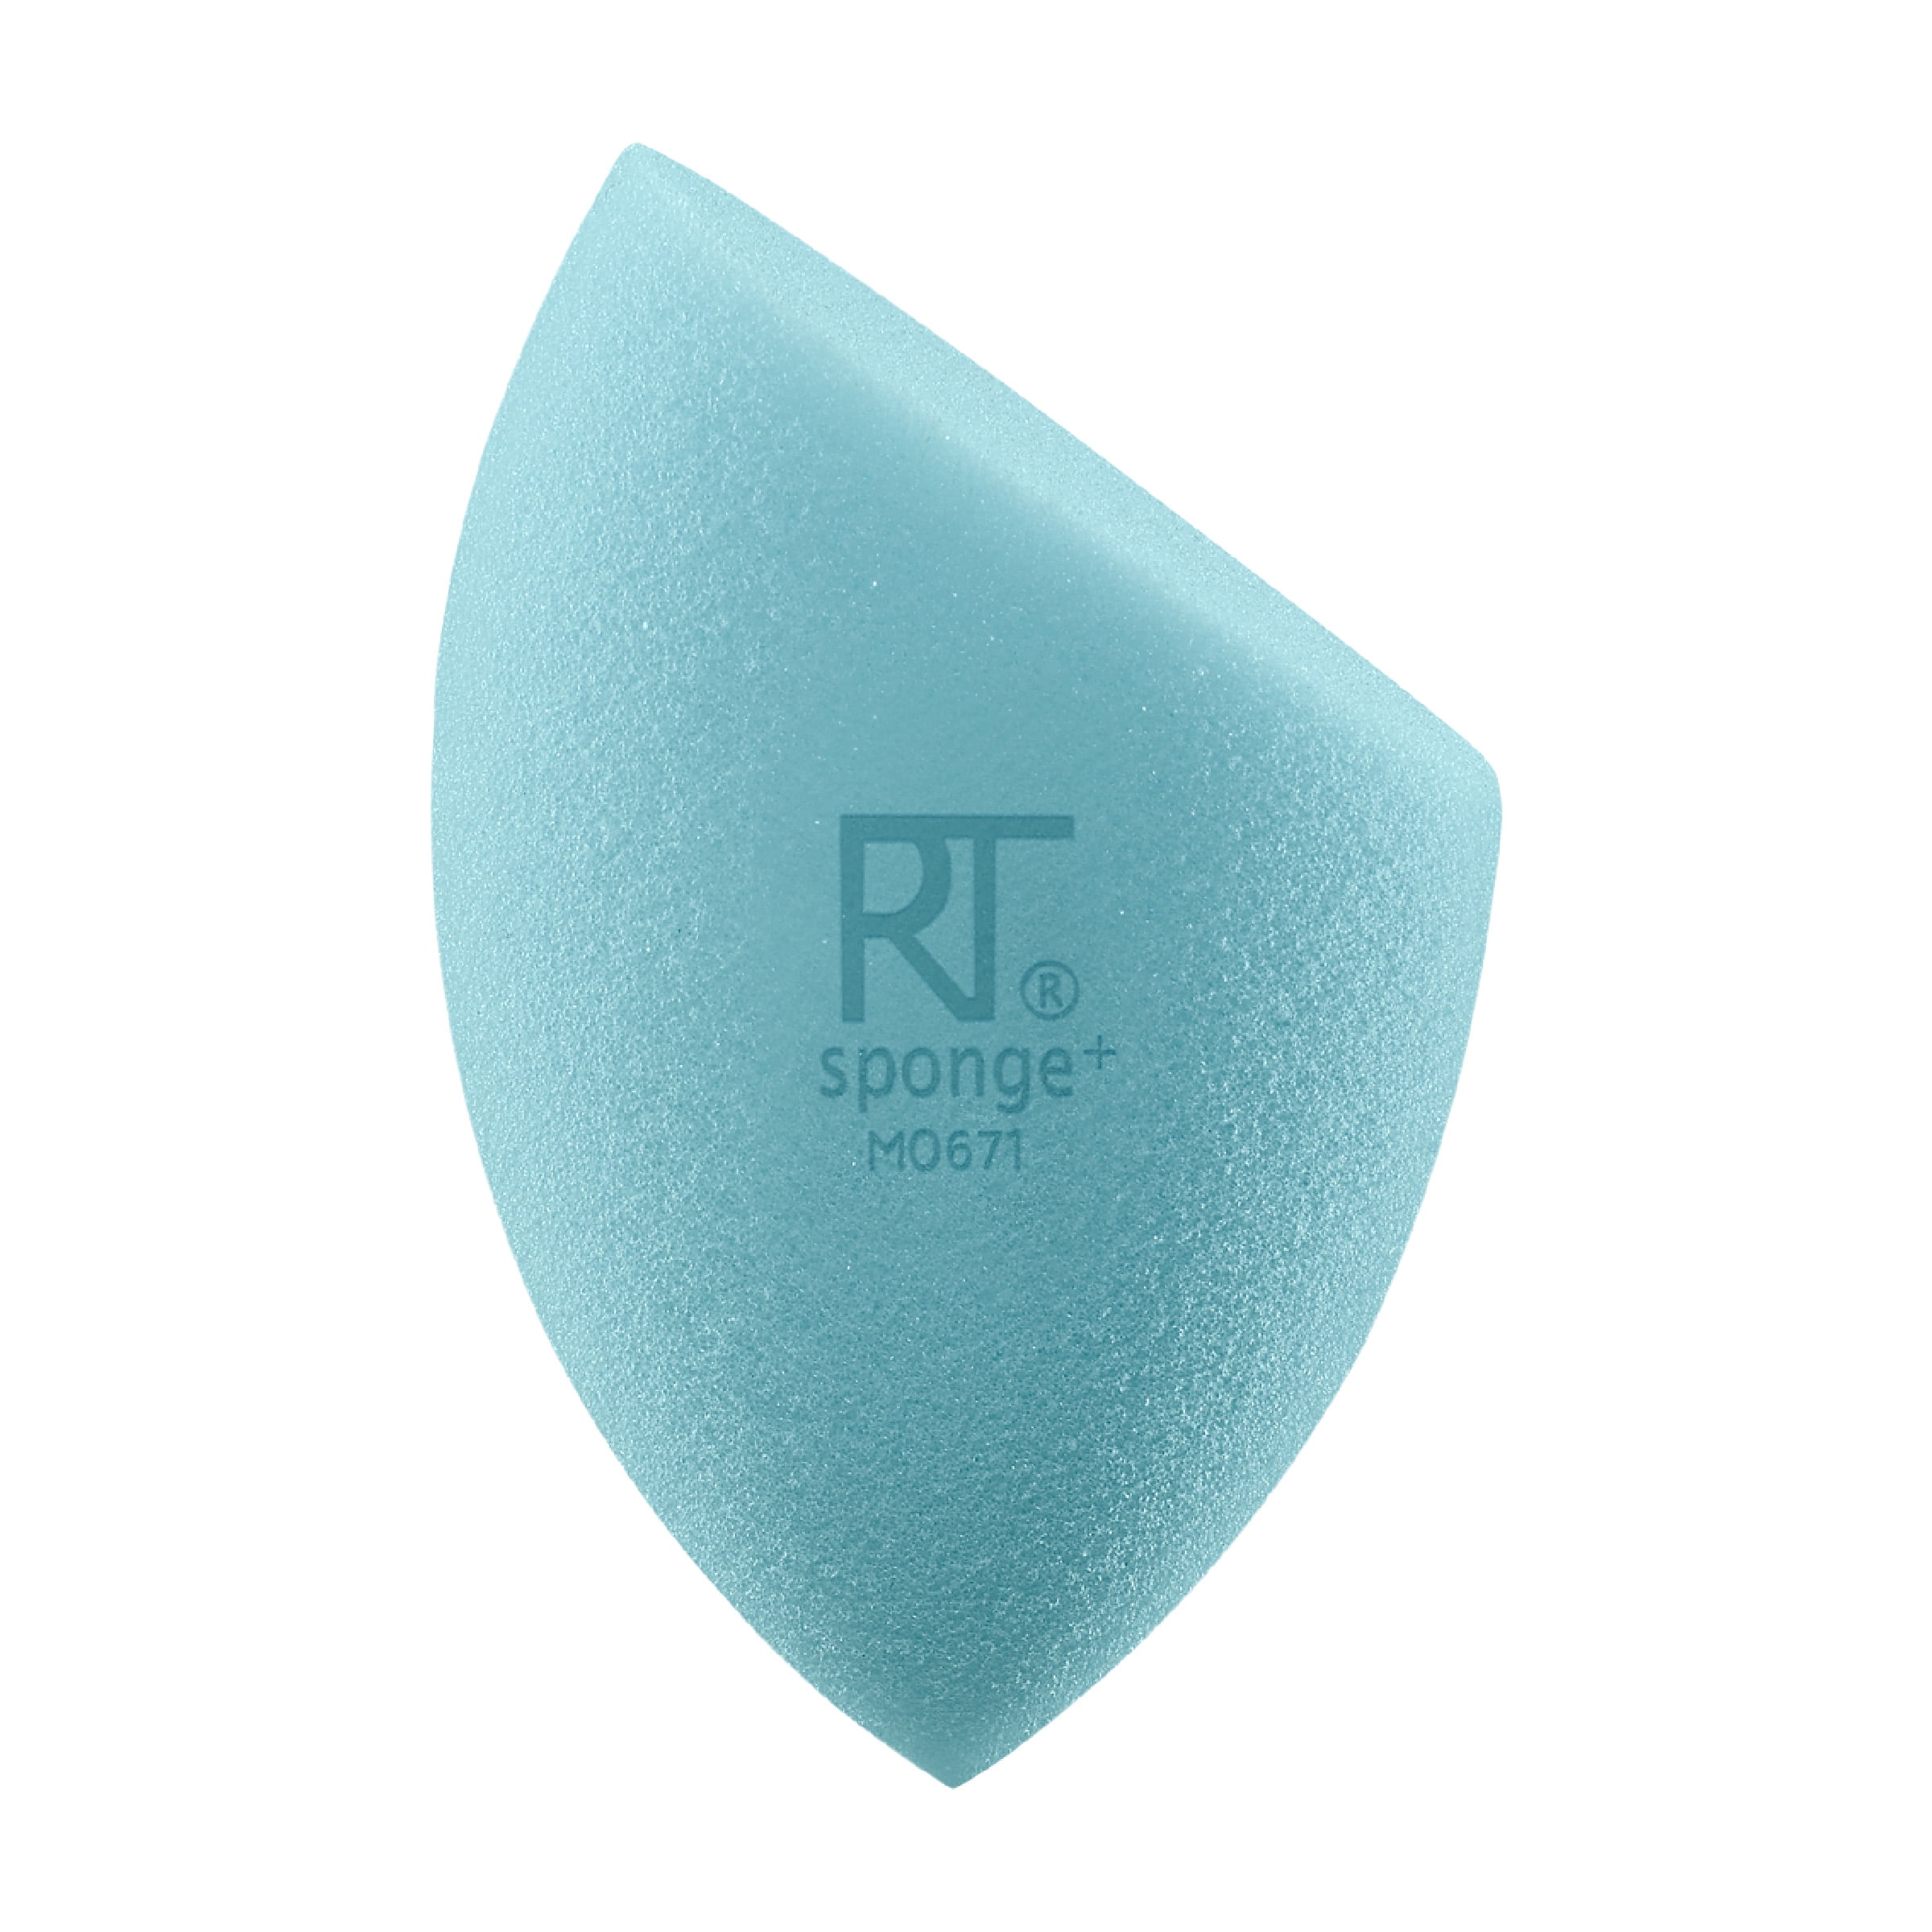 Real Techniques Airblend Mattifying Beauty Makeup Sponge